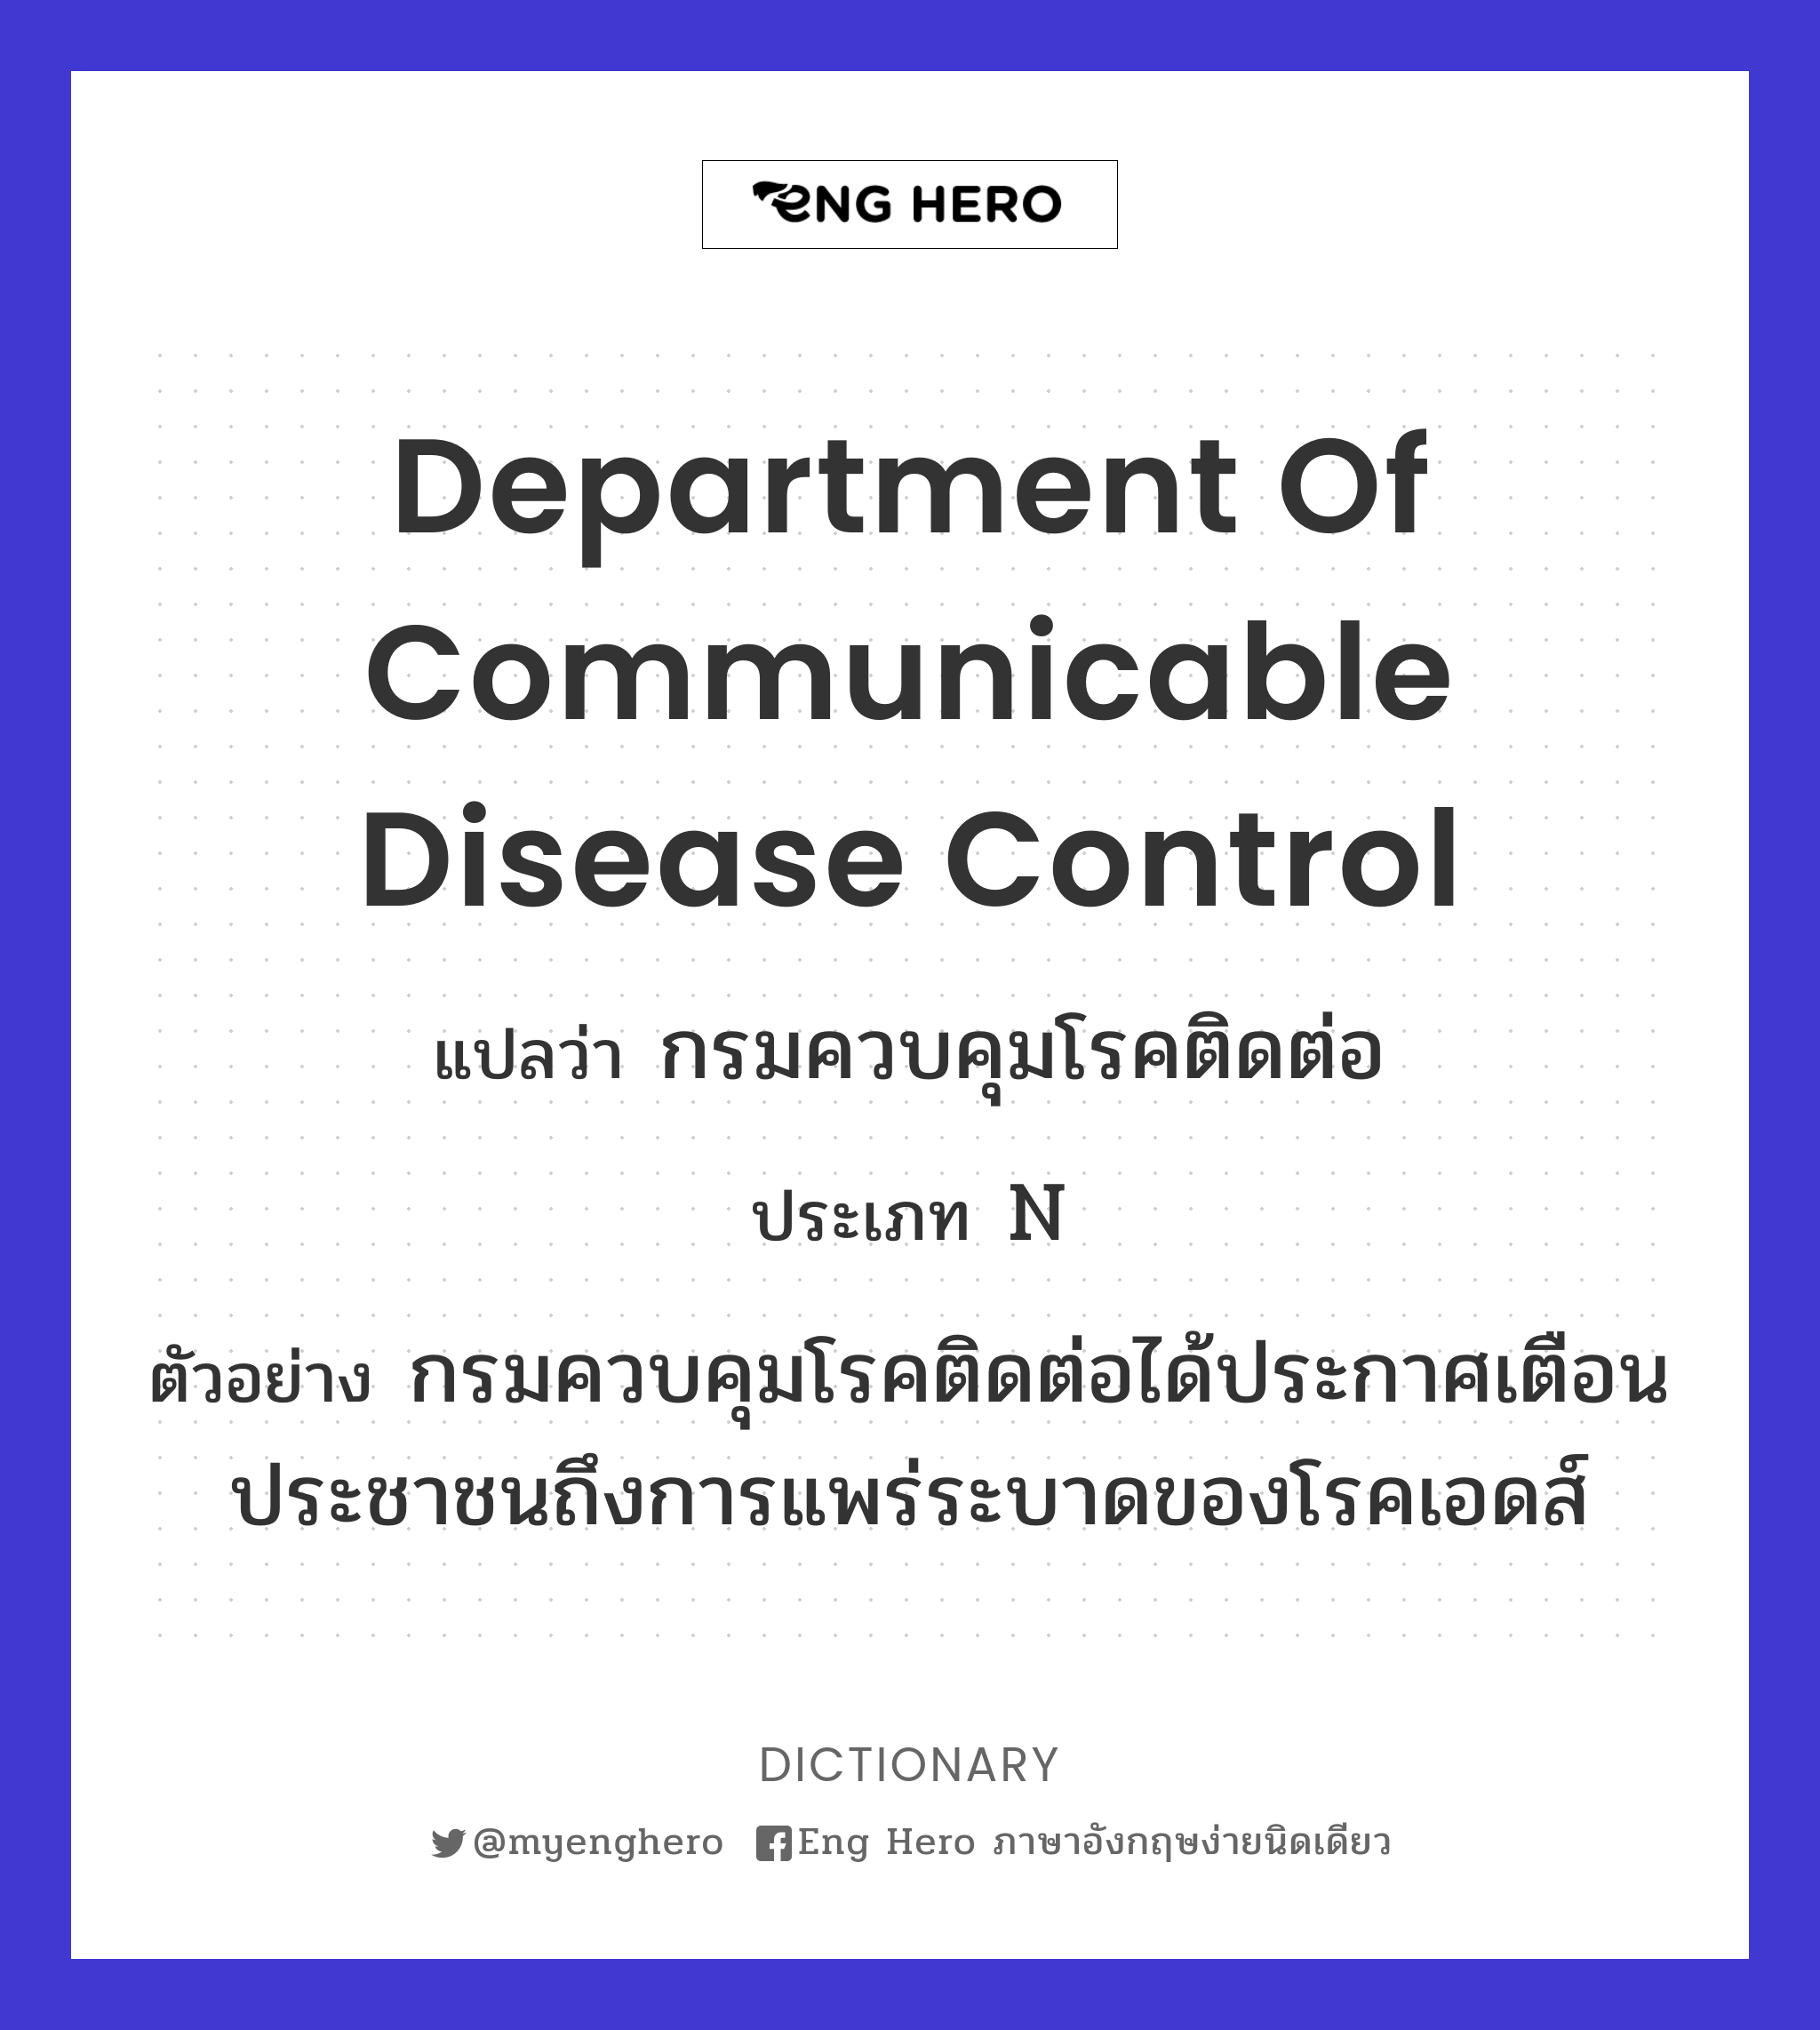 Department of Communicable Disease Control